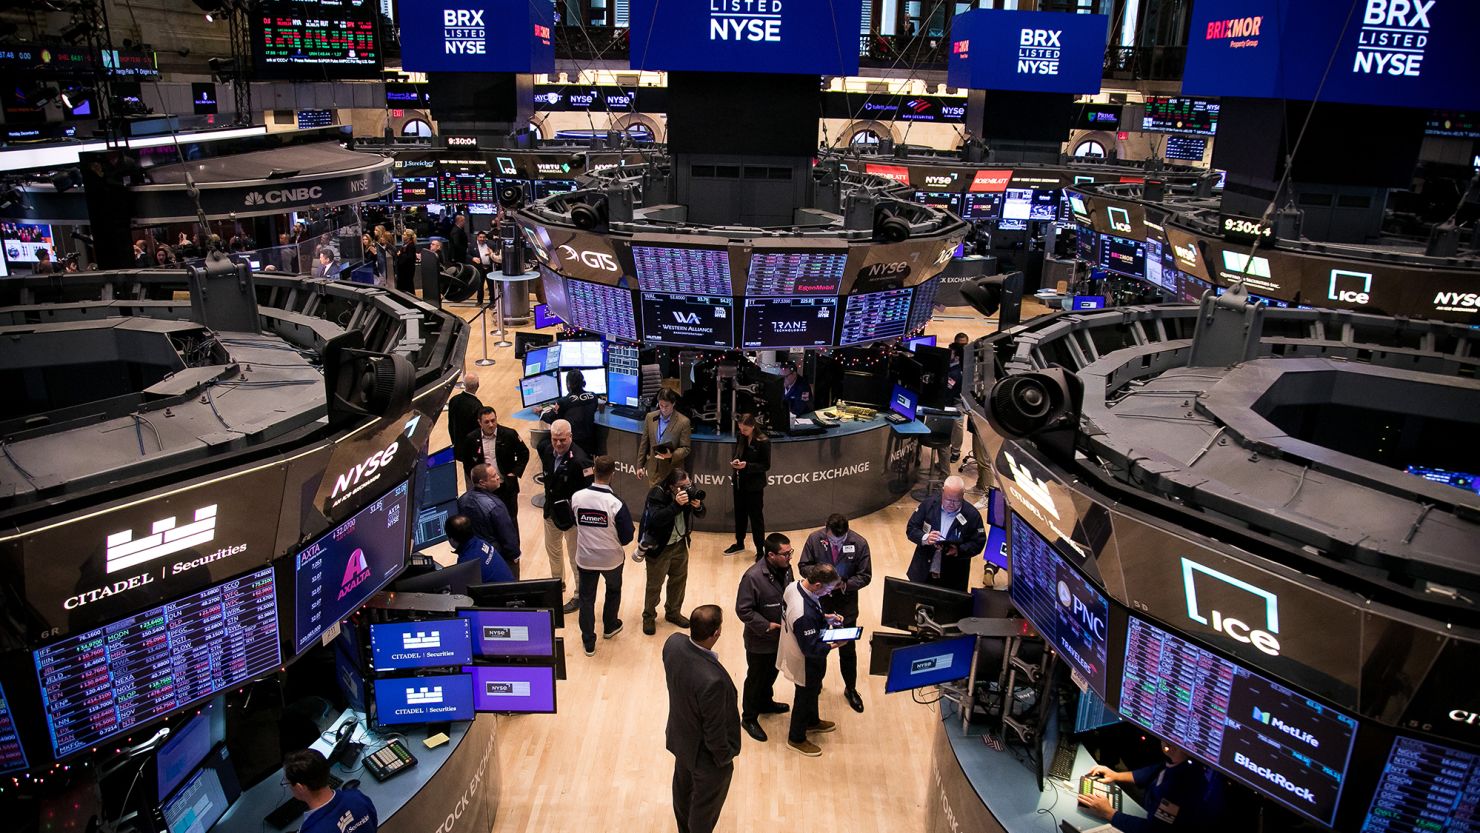 Premarket stocks: Retail investors are sitting out the stock